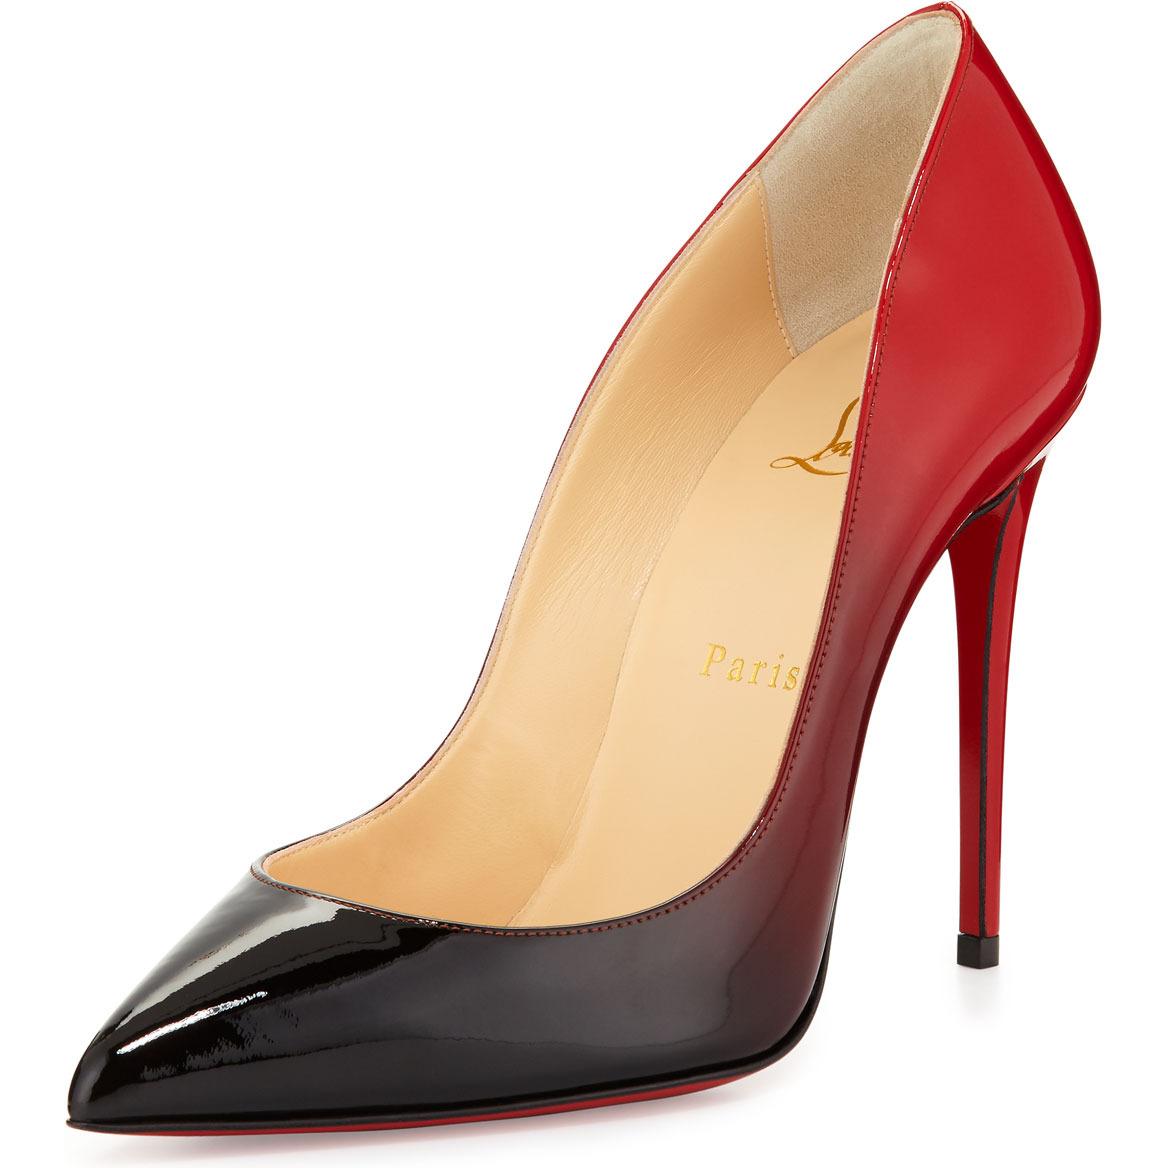 christian-louboutin-pigalle-follies-degrade-red-sole-pump-pic212266